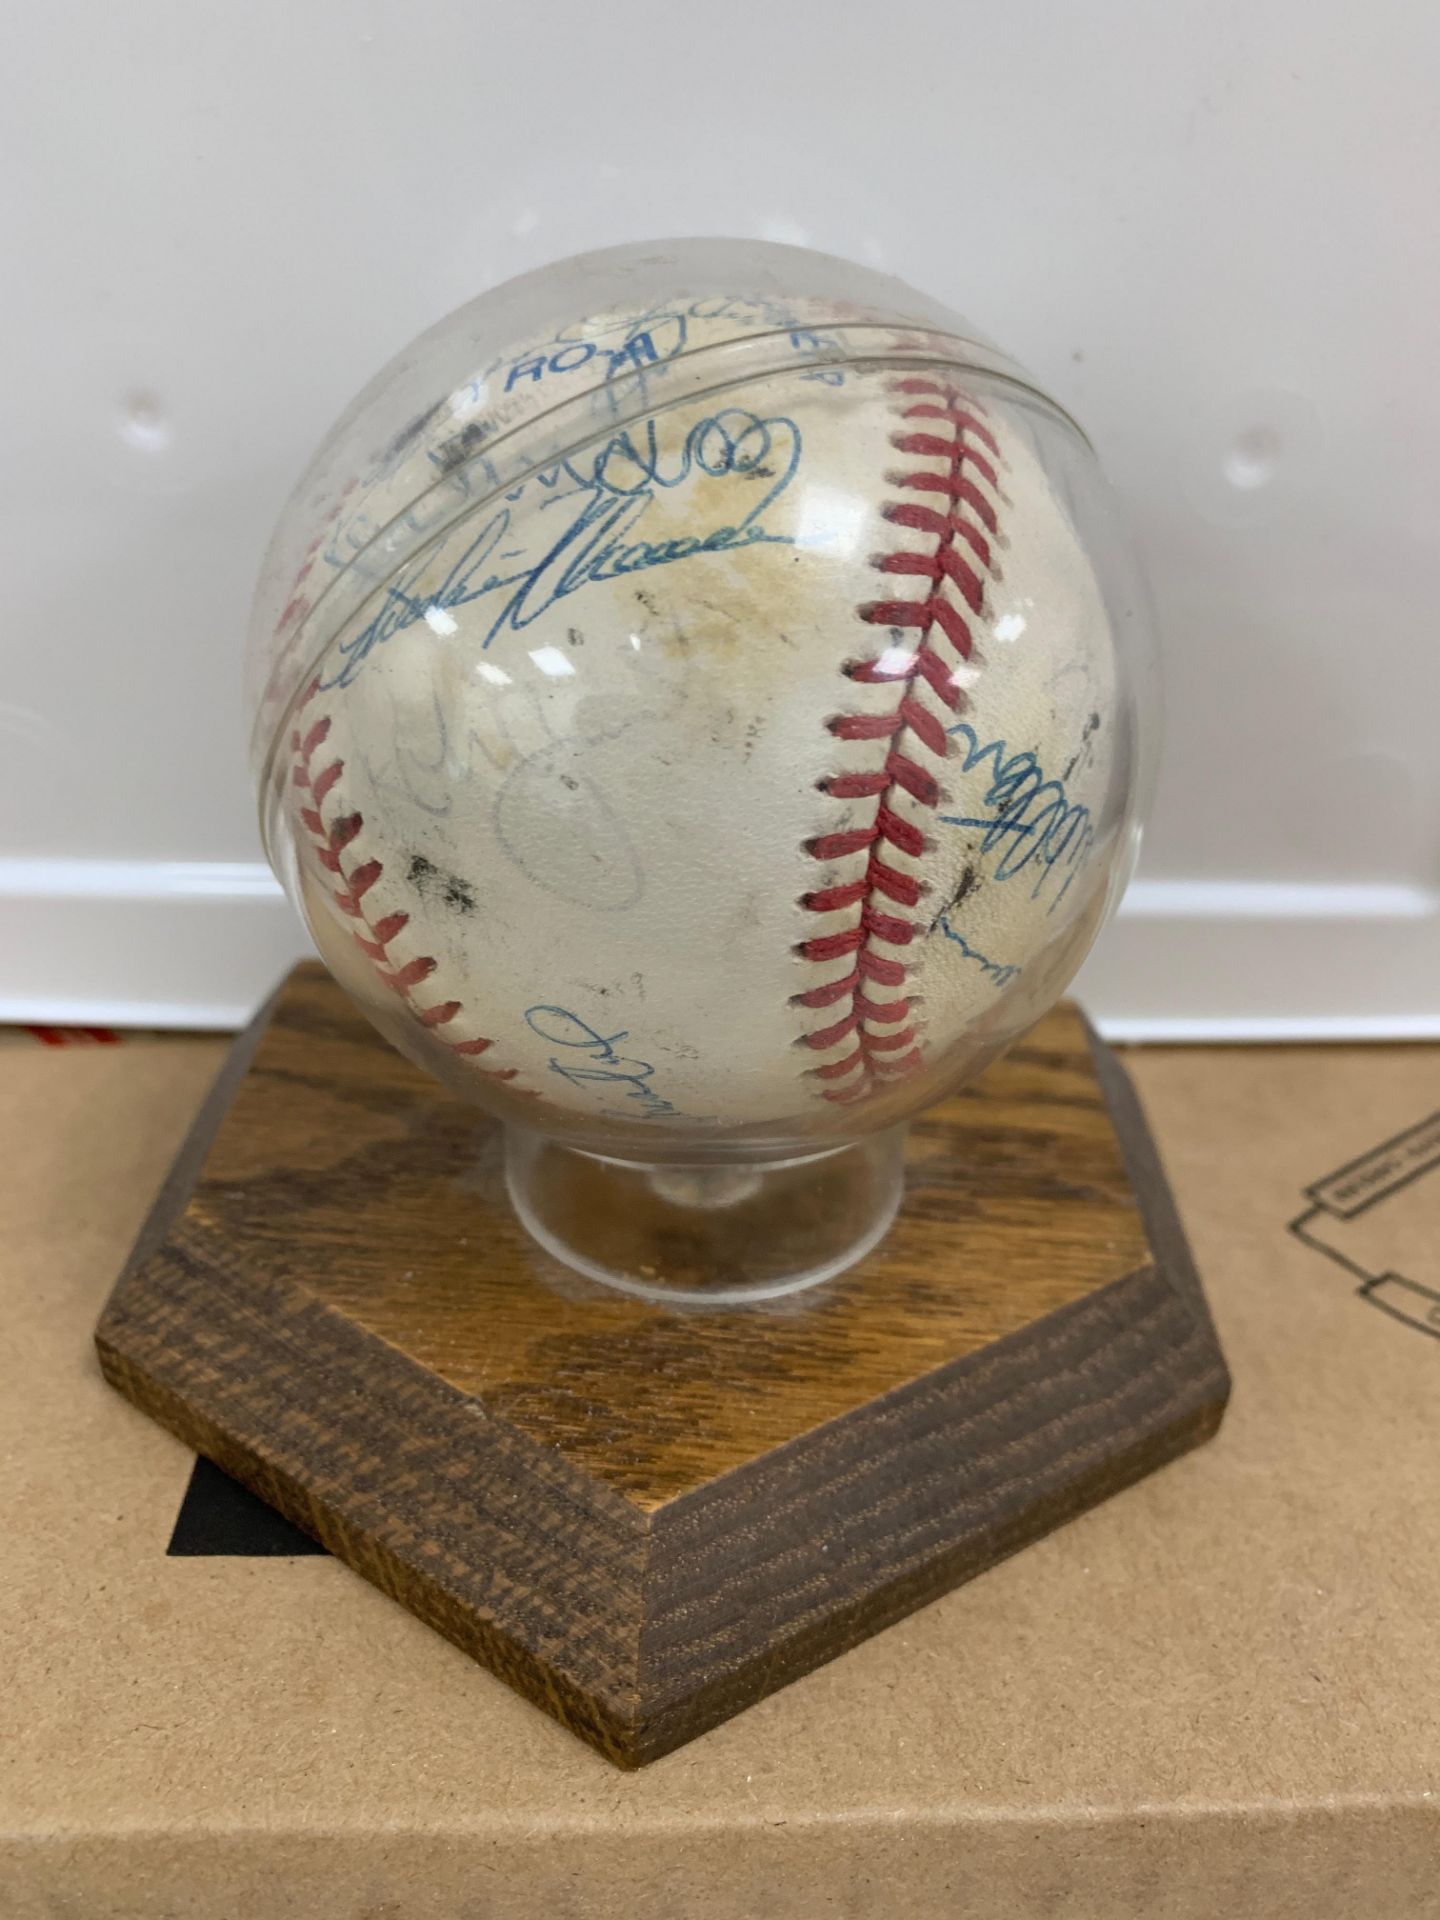 Signed Baseball by Milwaukee Braves Baseball Team, in Case and Stand - Image 5 of 5